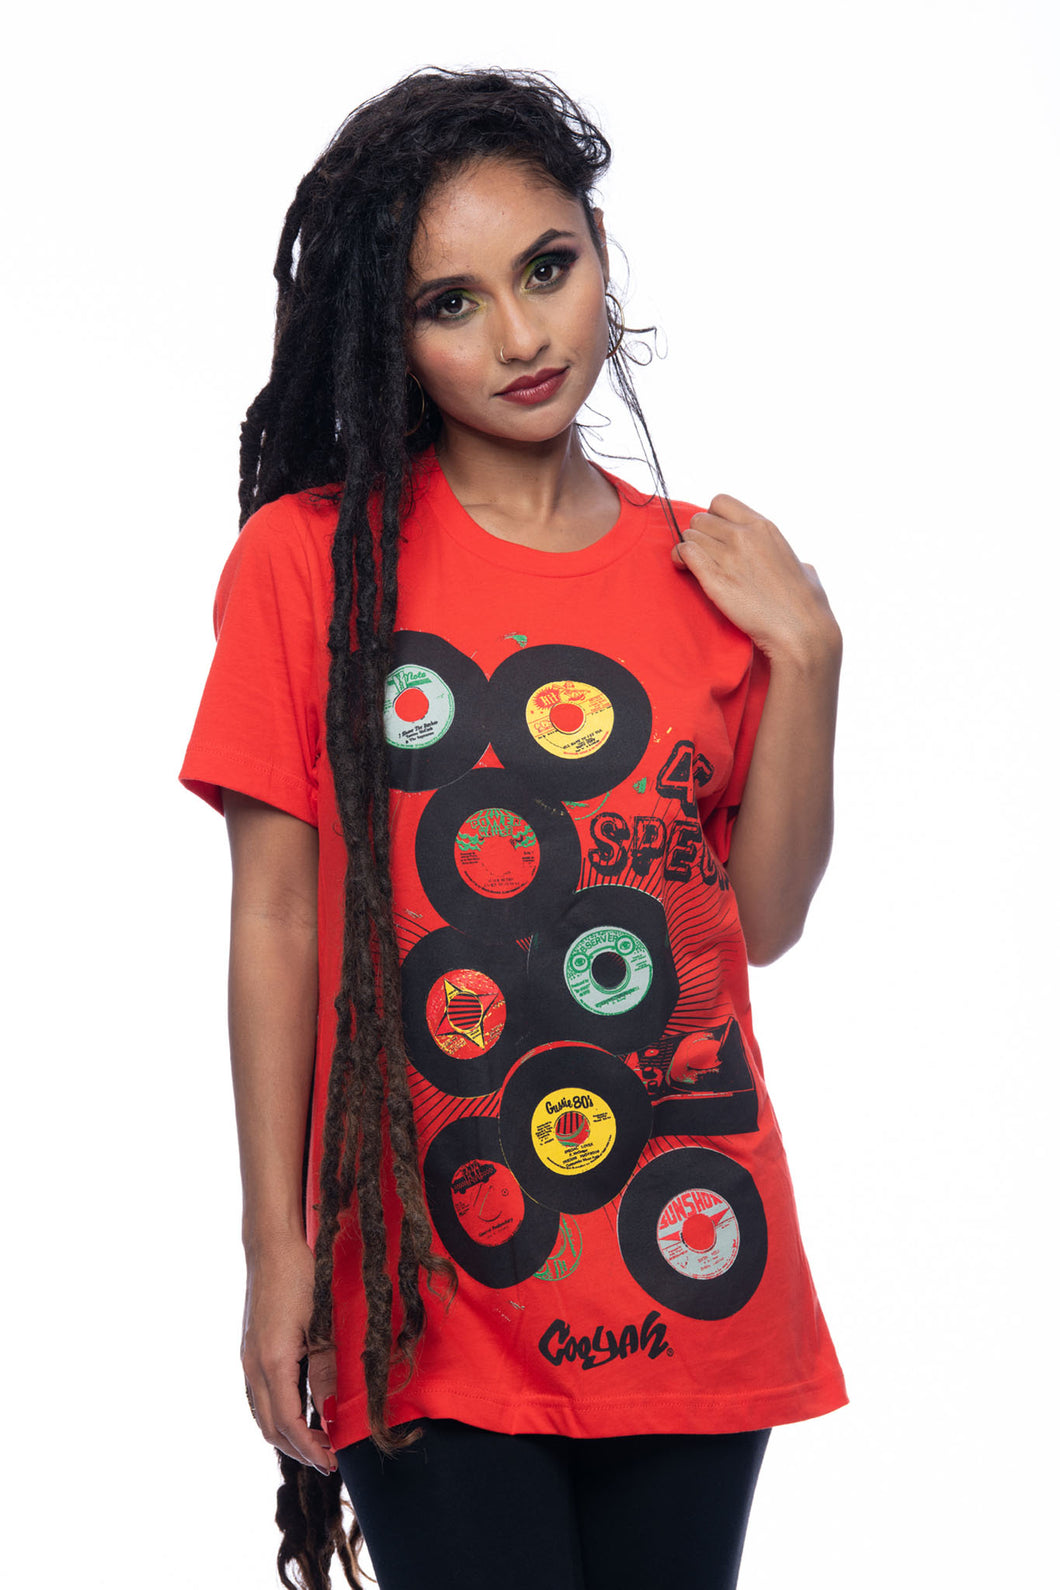 Cooyah Jamaica. Women's short sleeve graphic tee with 45 RPM Vinyl records screen printed on the front. Vintage reggae and rocksteady style. Red boyfriend-fit Shirt, short sleeve, ringspun cotton. Jamaican streetwear clothing brand. IRIE